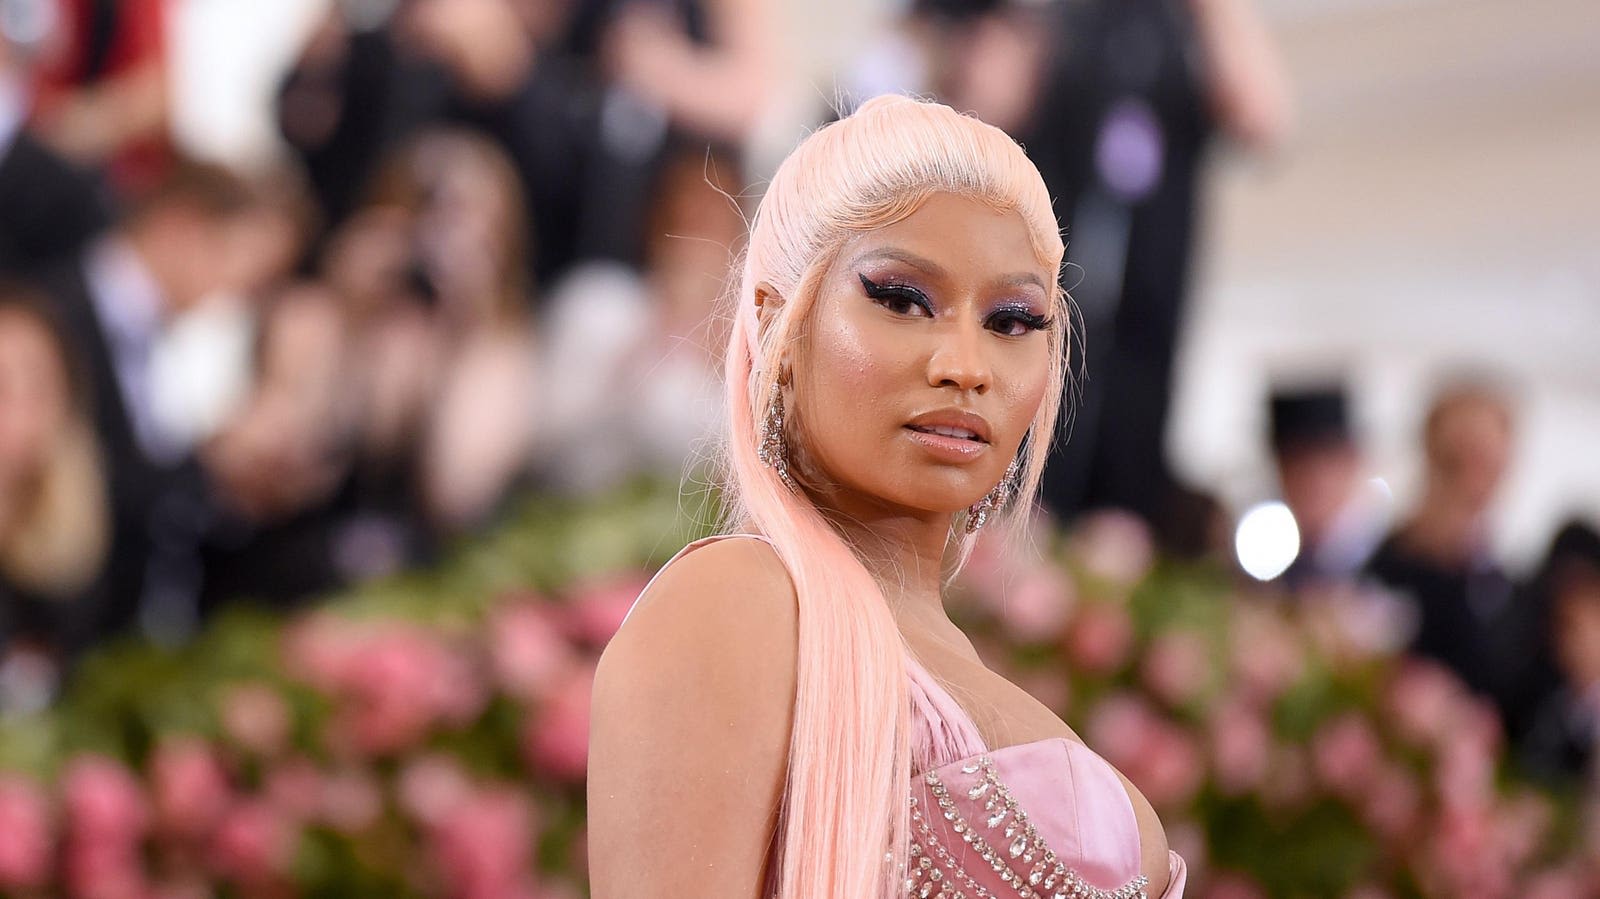 Nicki Minaj Films Herself Getting Arrested In Amsterdam For ‘Carrying Drugs’: Here’s What We Know